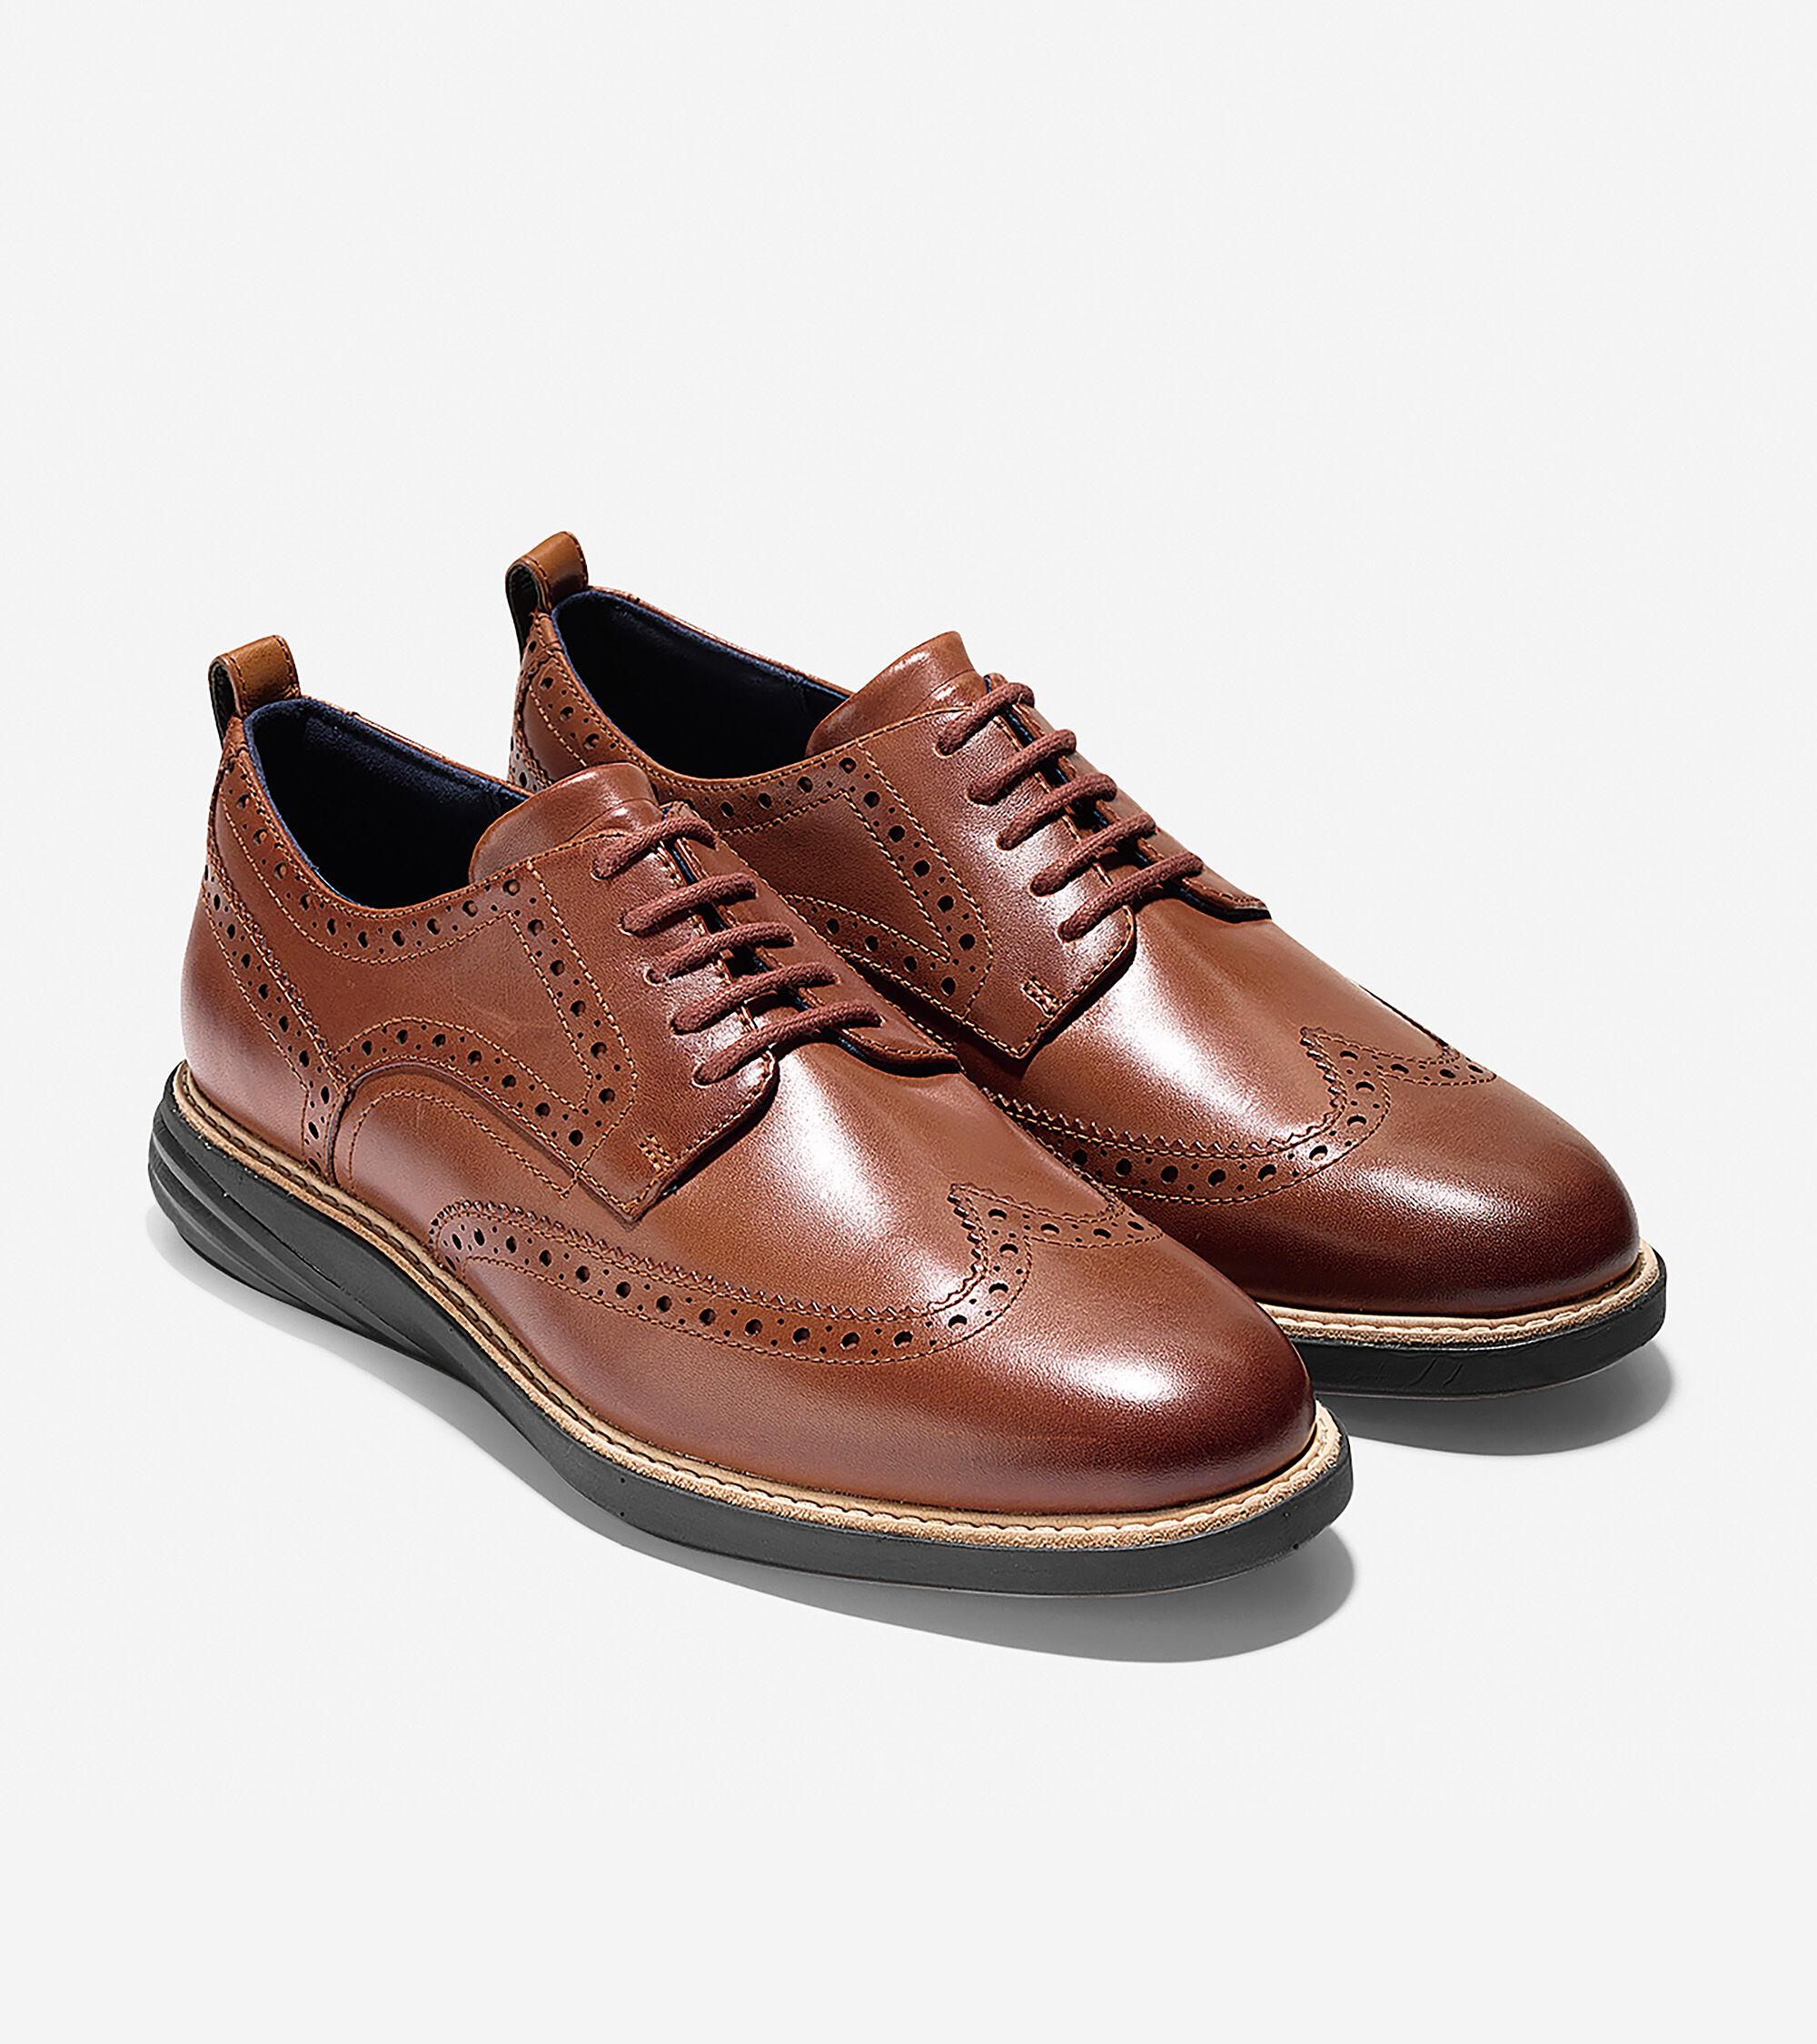 Cole Haan Leather Grand Evolution Wingtip Oxford in Brown for Men - Lyst